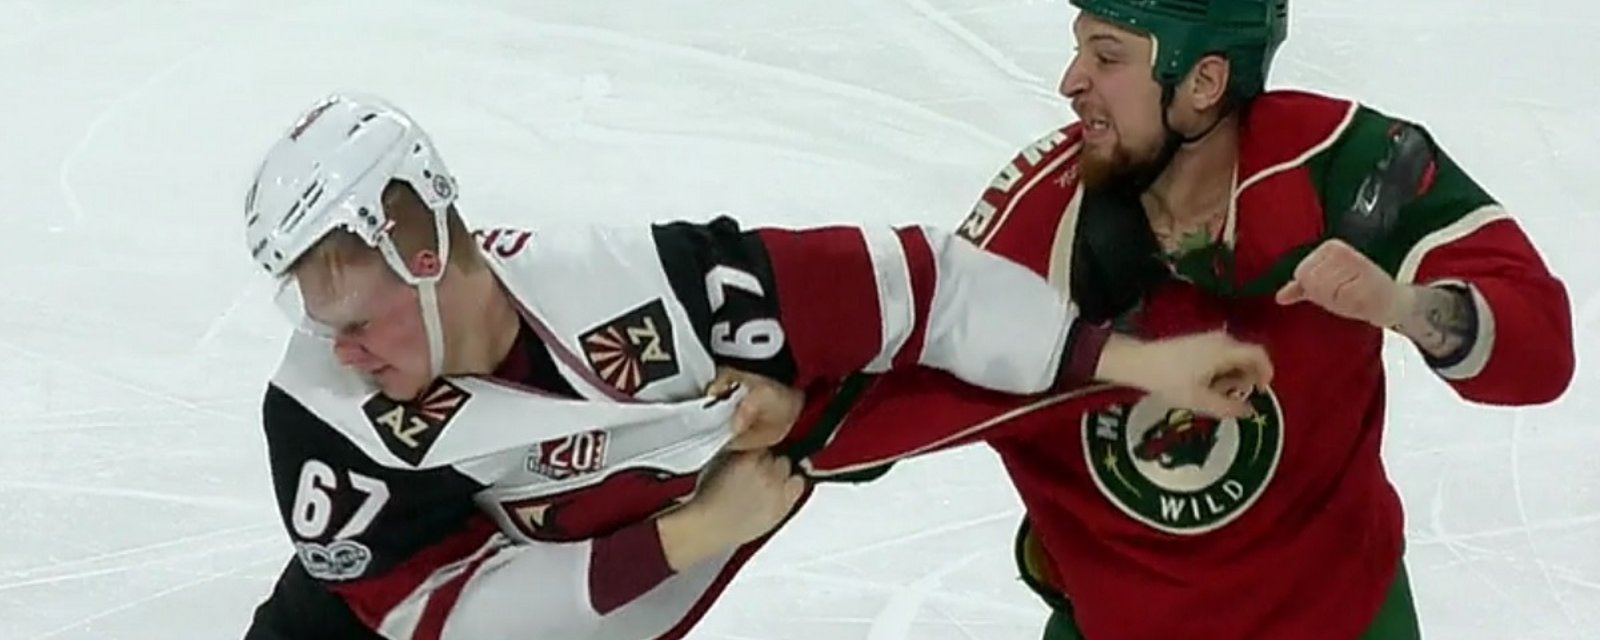 Stewart delivers perhaps the worst beat down of the year in the NHL!